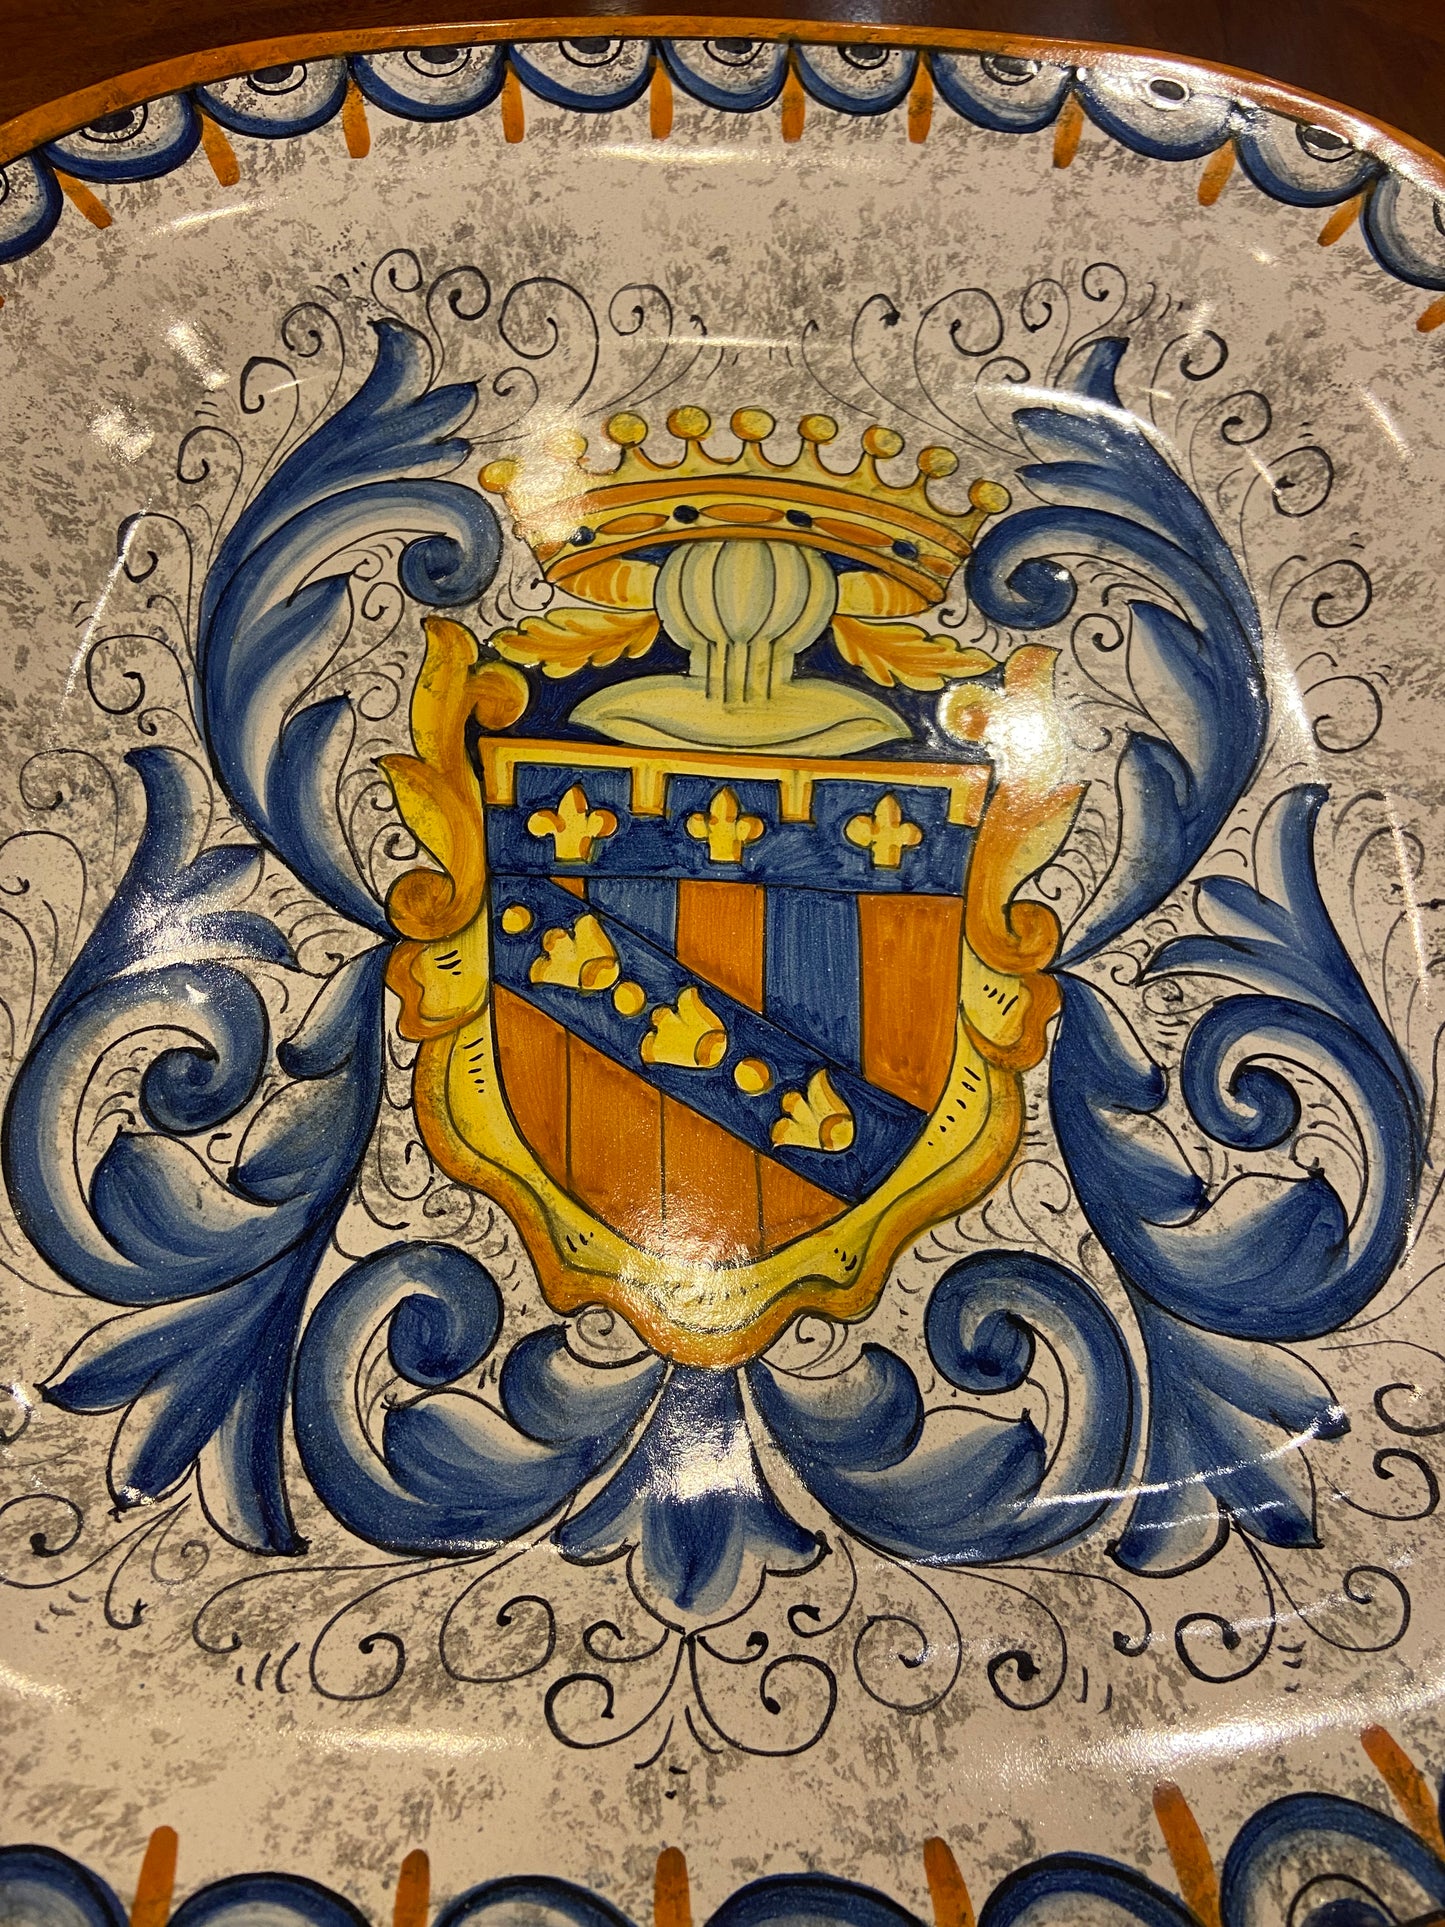 Artistica Coat of Arms Plate (24293)